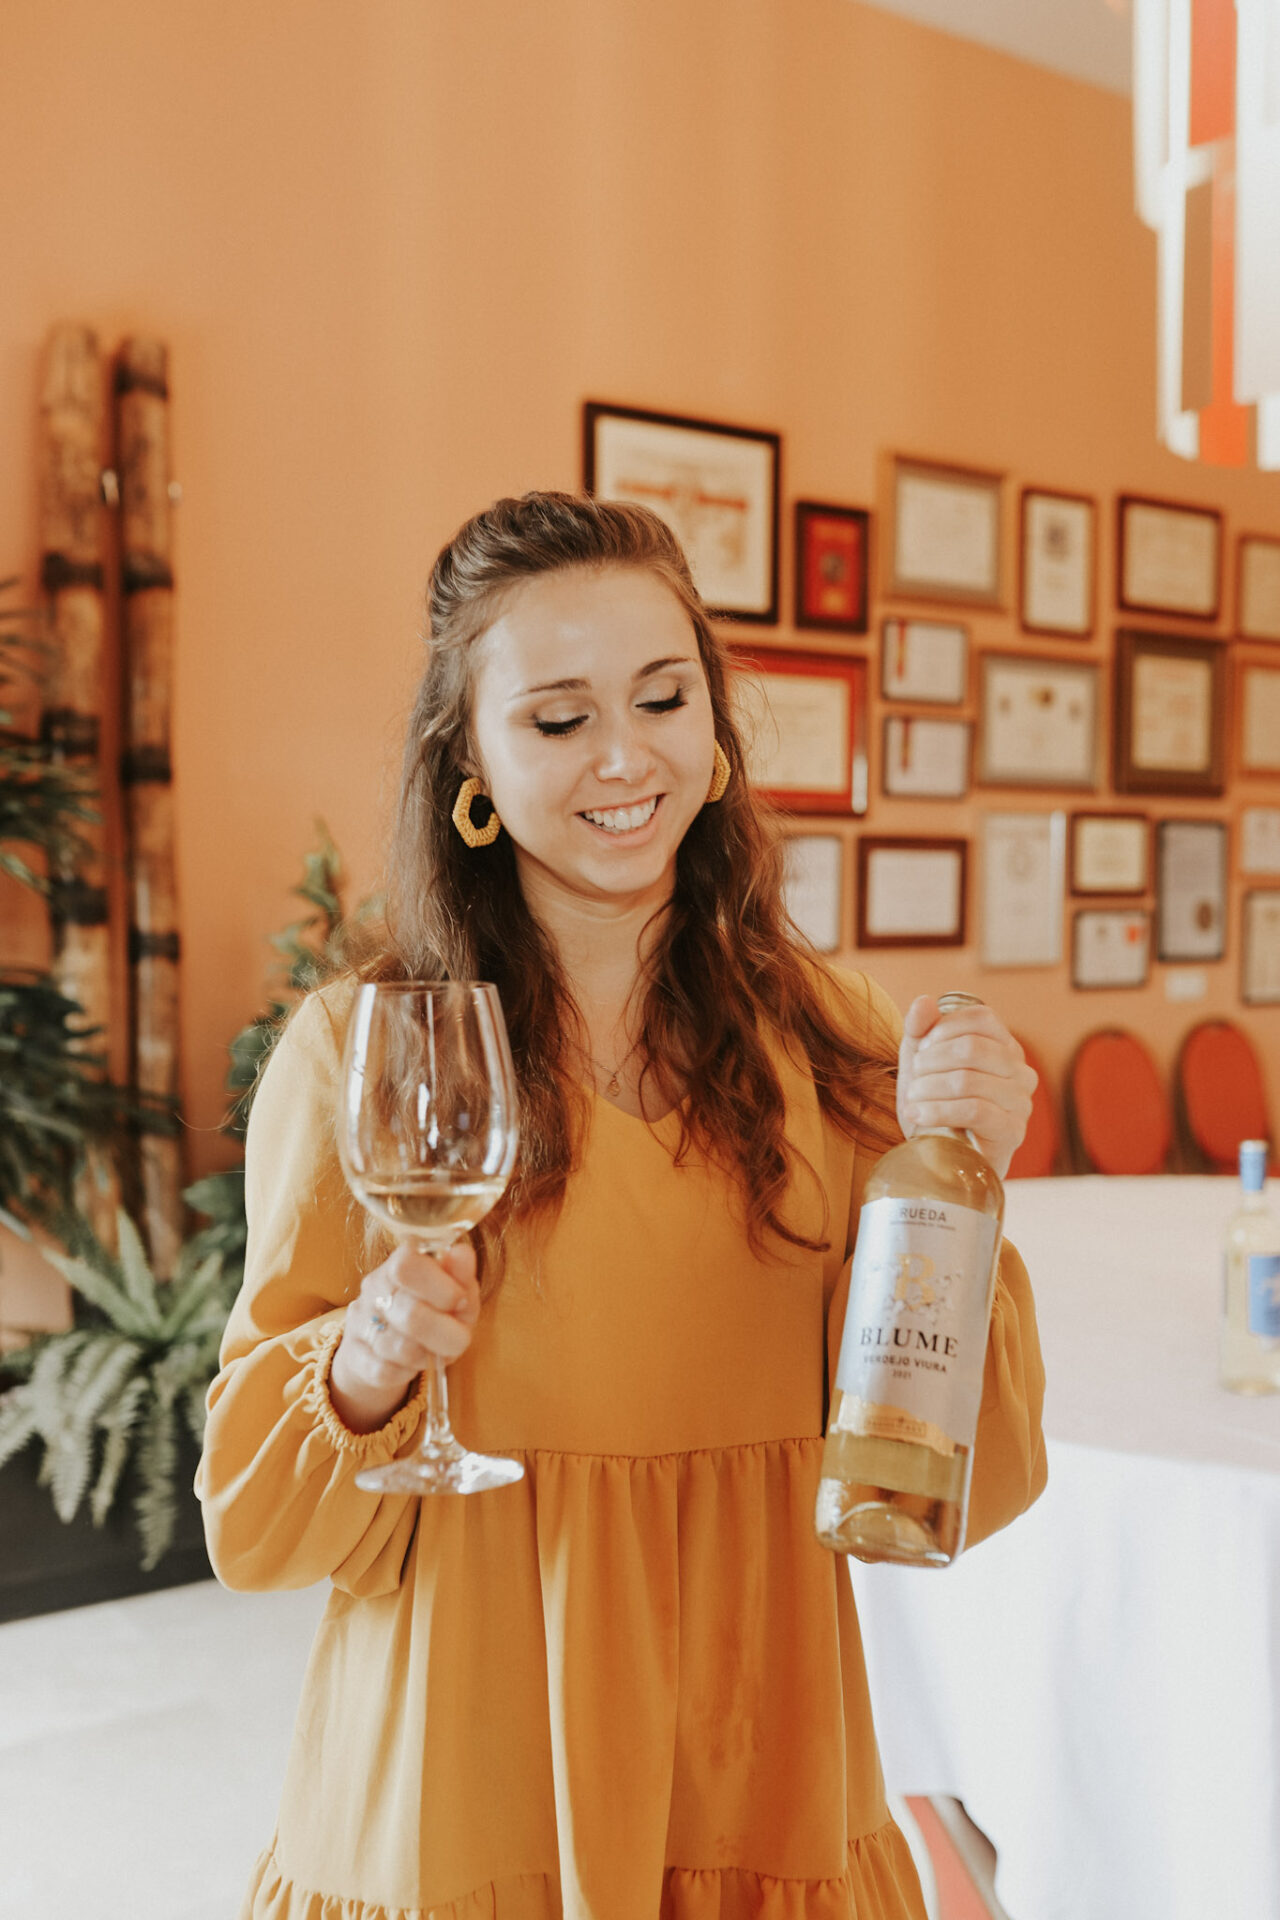 Paige holding Blume Verdejo wine at Bodegas Pagos del Rey